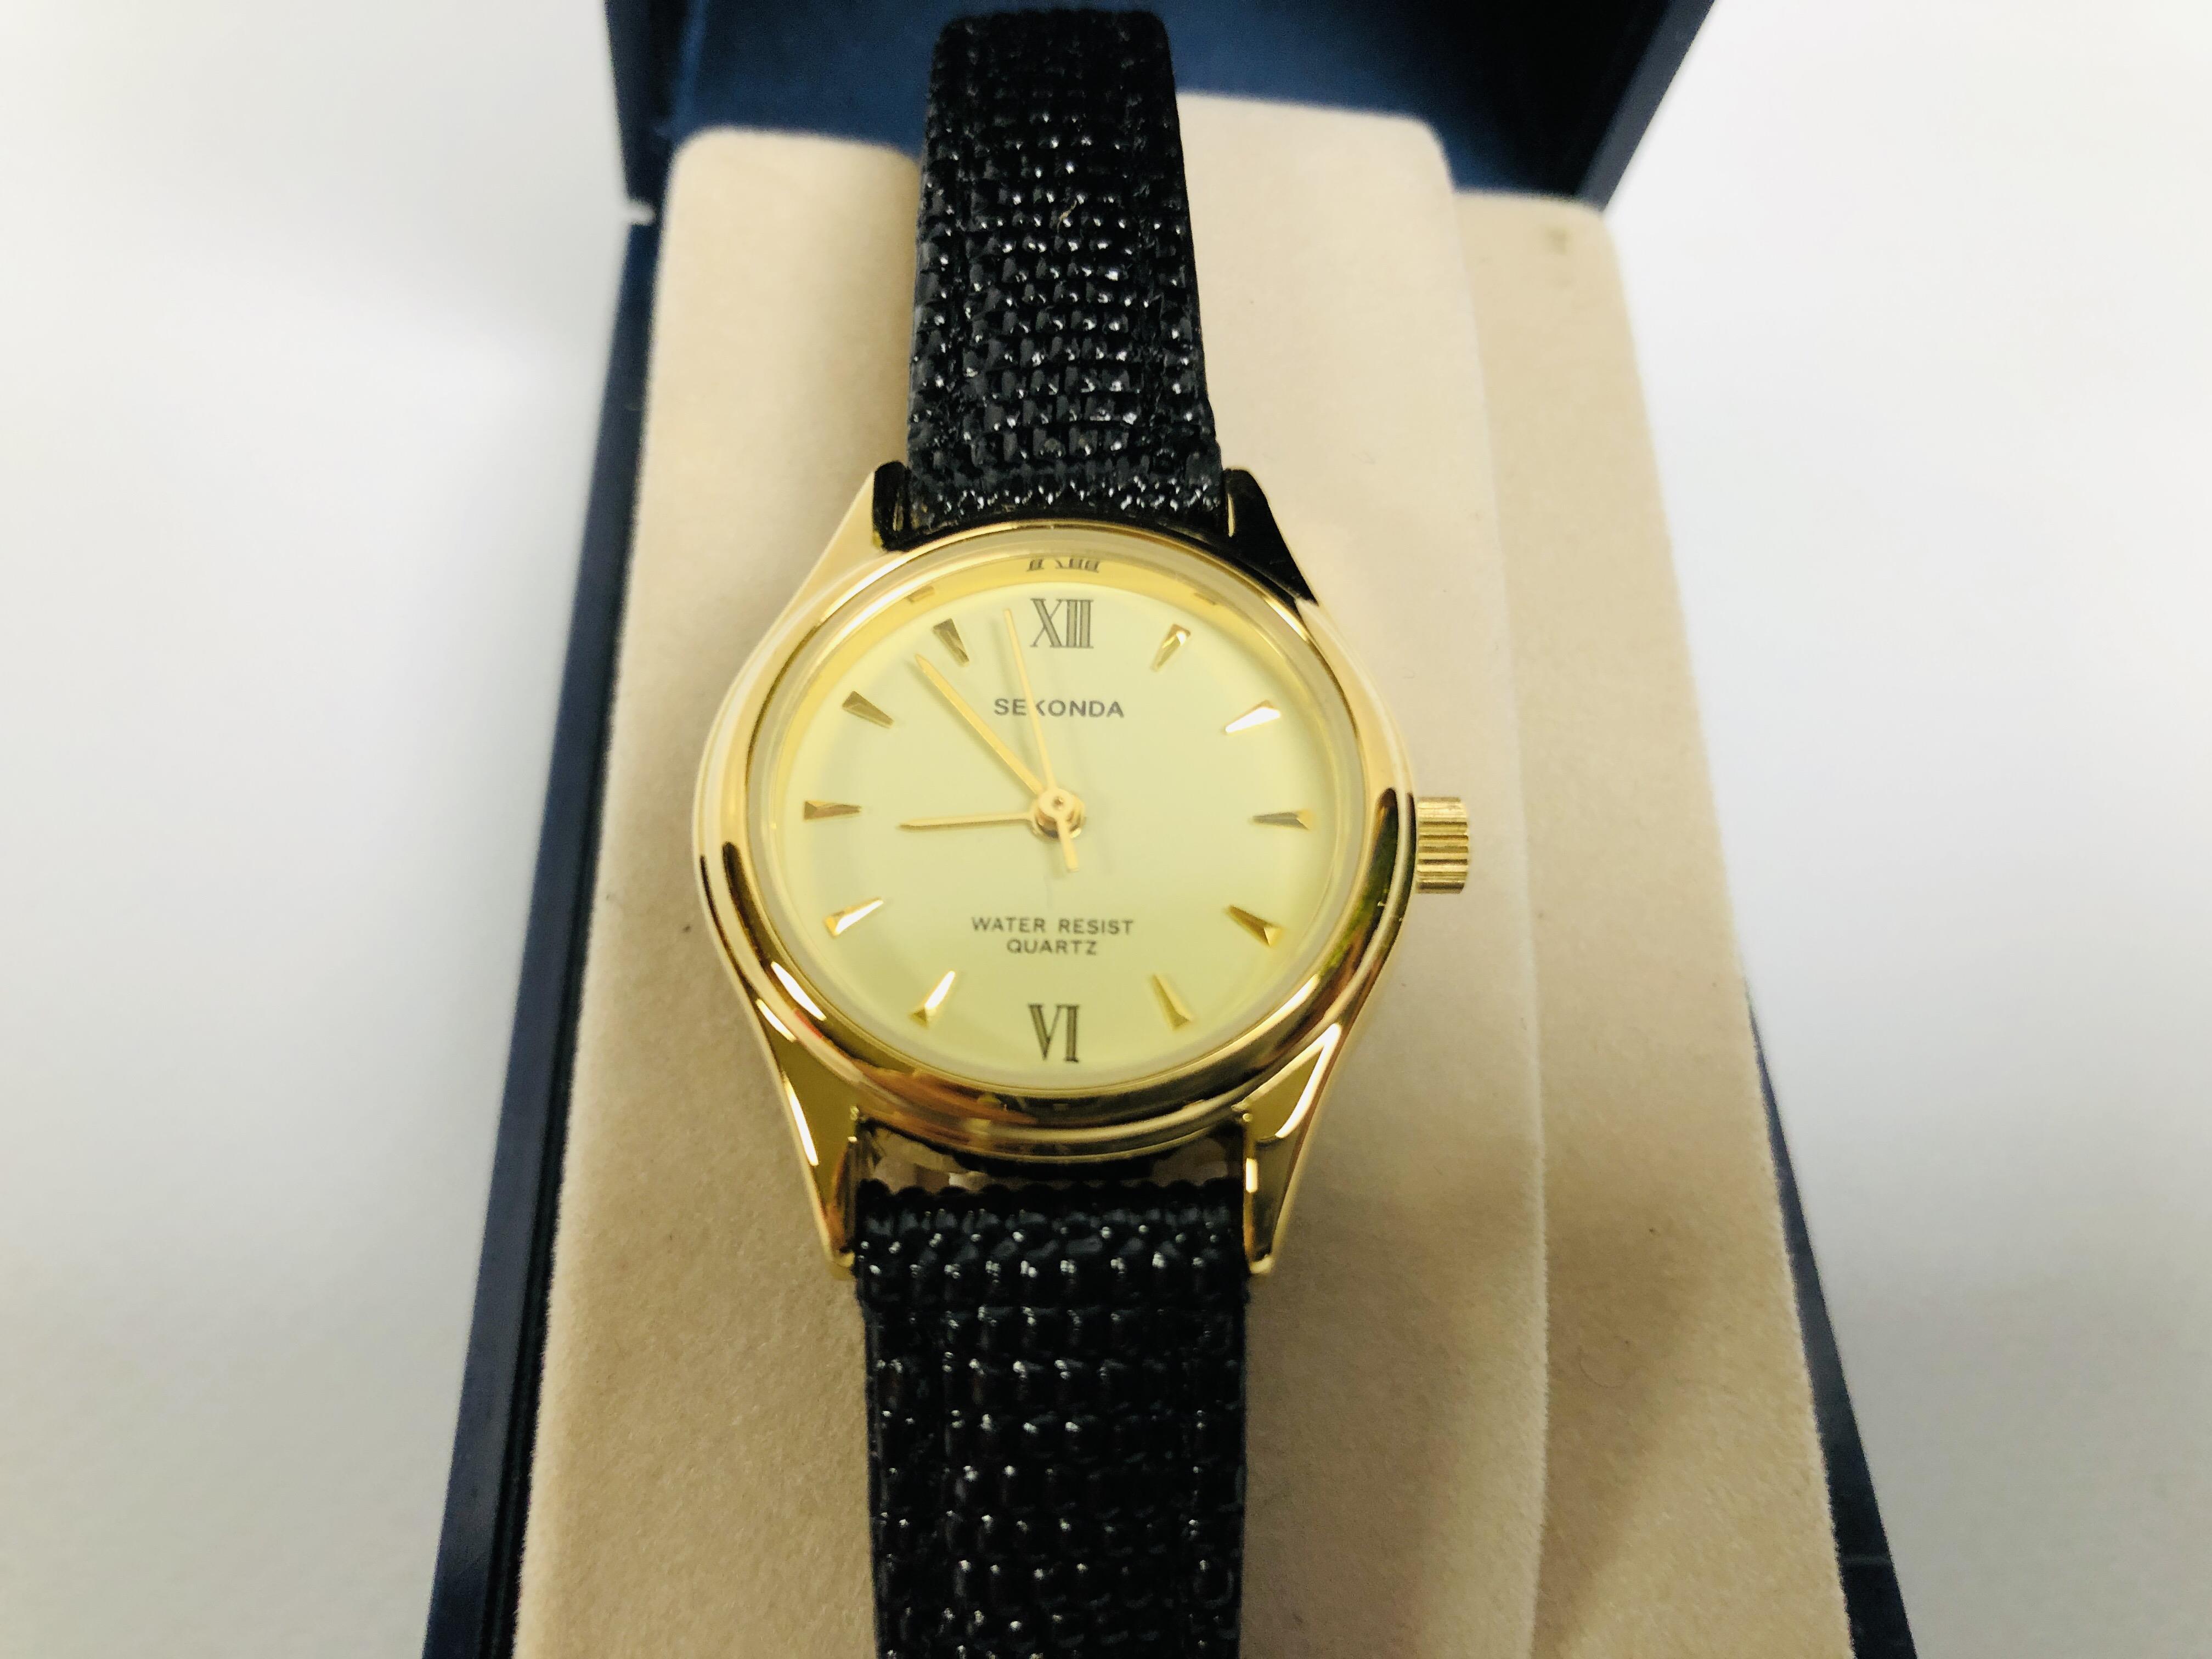 BOXED GENT'S ROTARY WRIST WATCH ALONG WITH A BOXED SEKONDA WRIST WATCH - Image 4 of 5